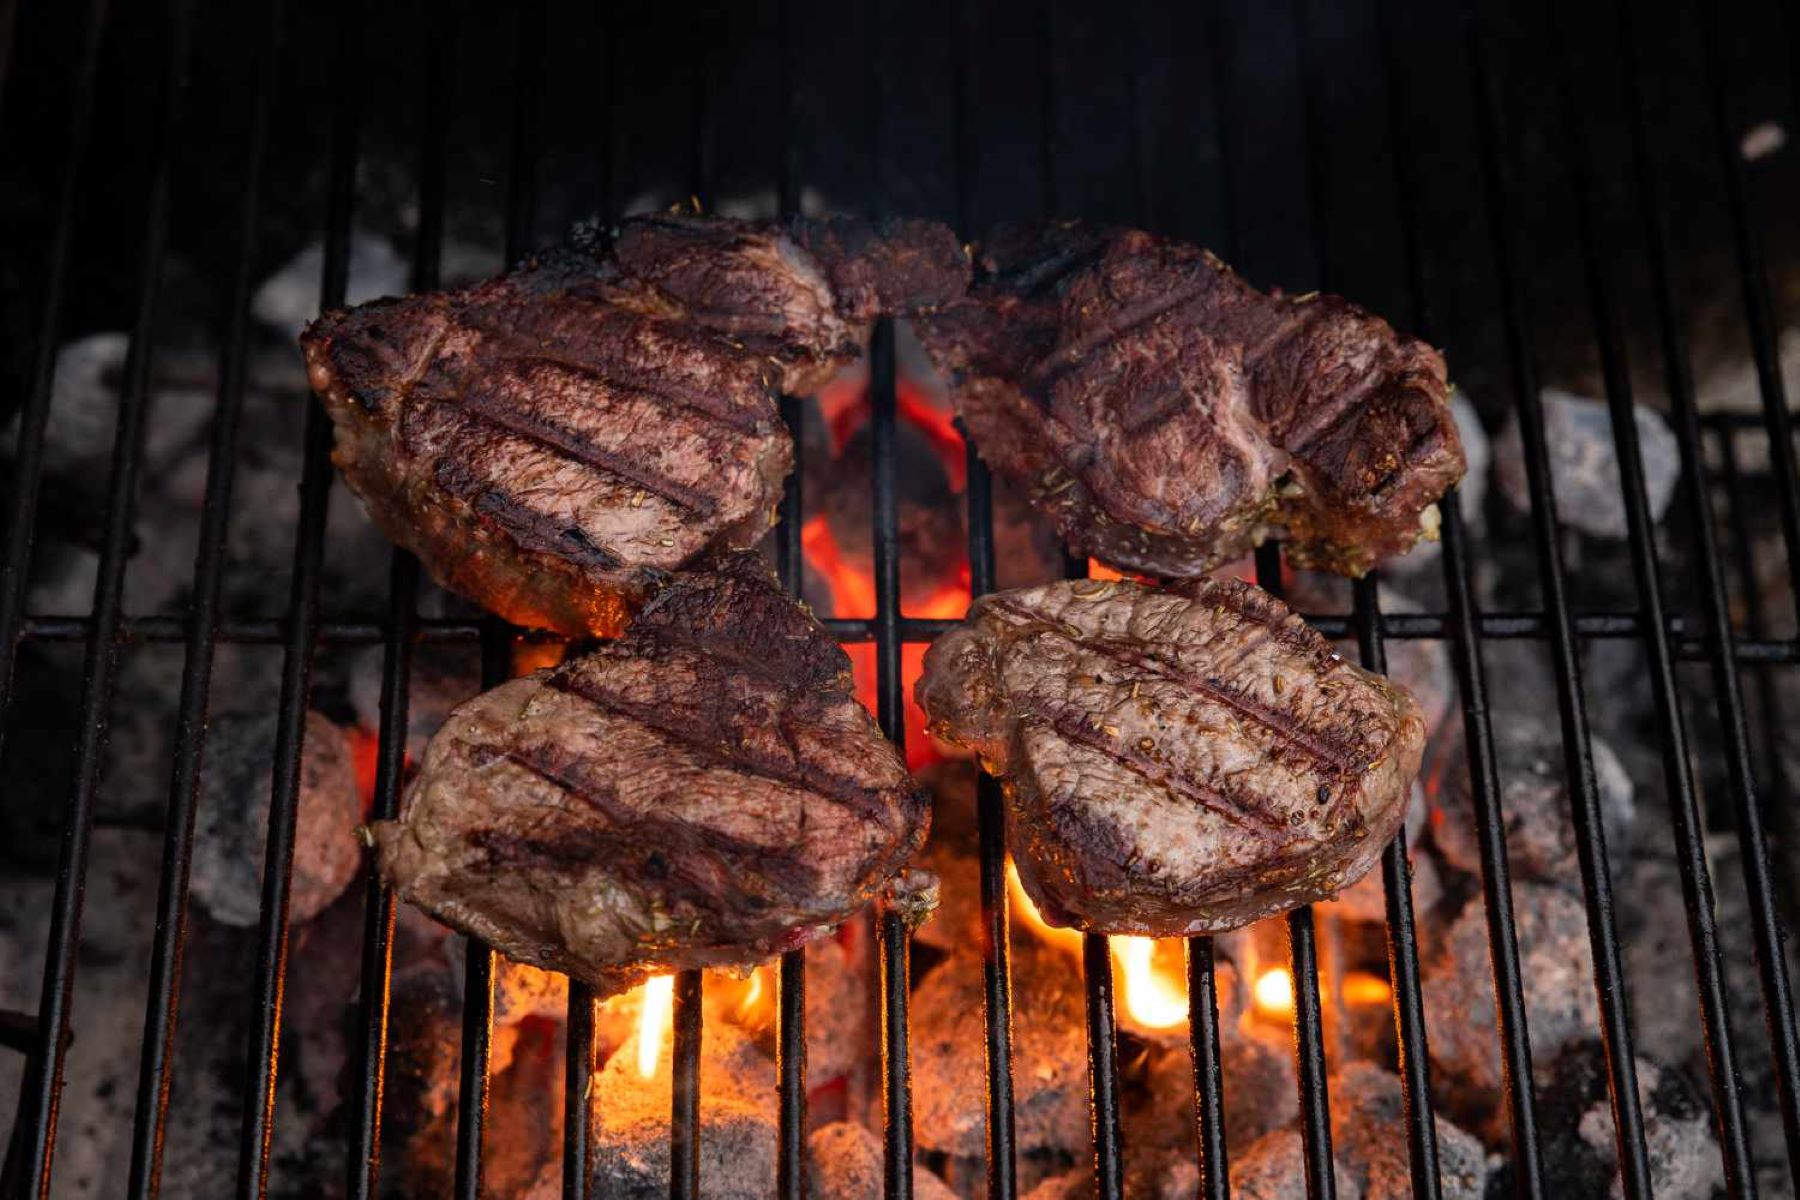 Unconventional Steak Cooking: Smoker Vs. Grill, Broil, And Pan-Sear - Which Reigns Supreme?